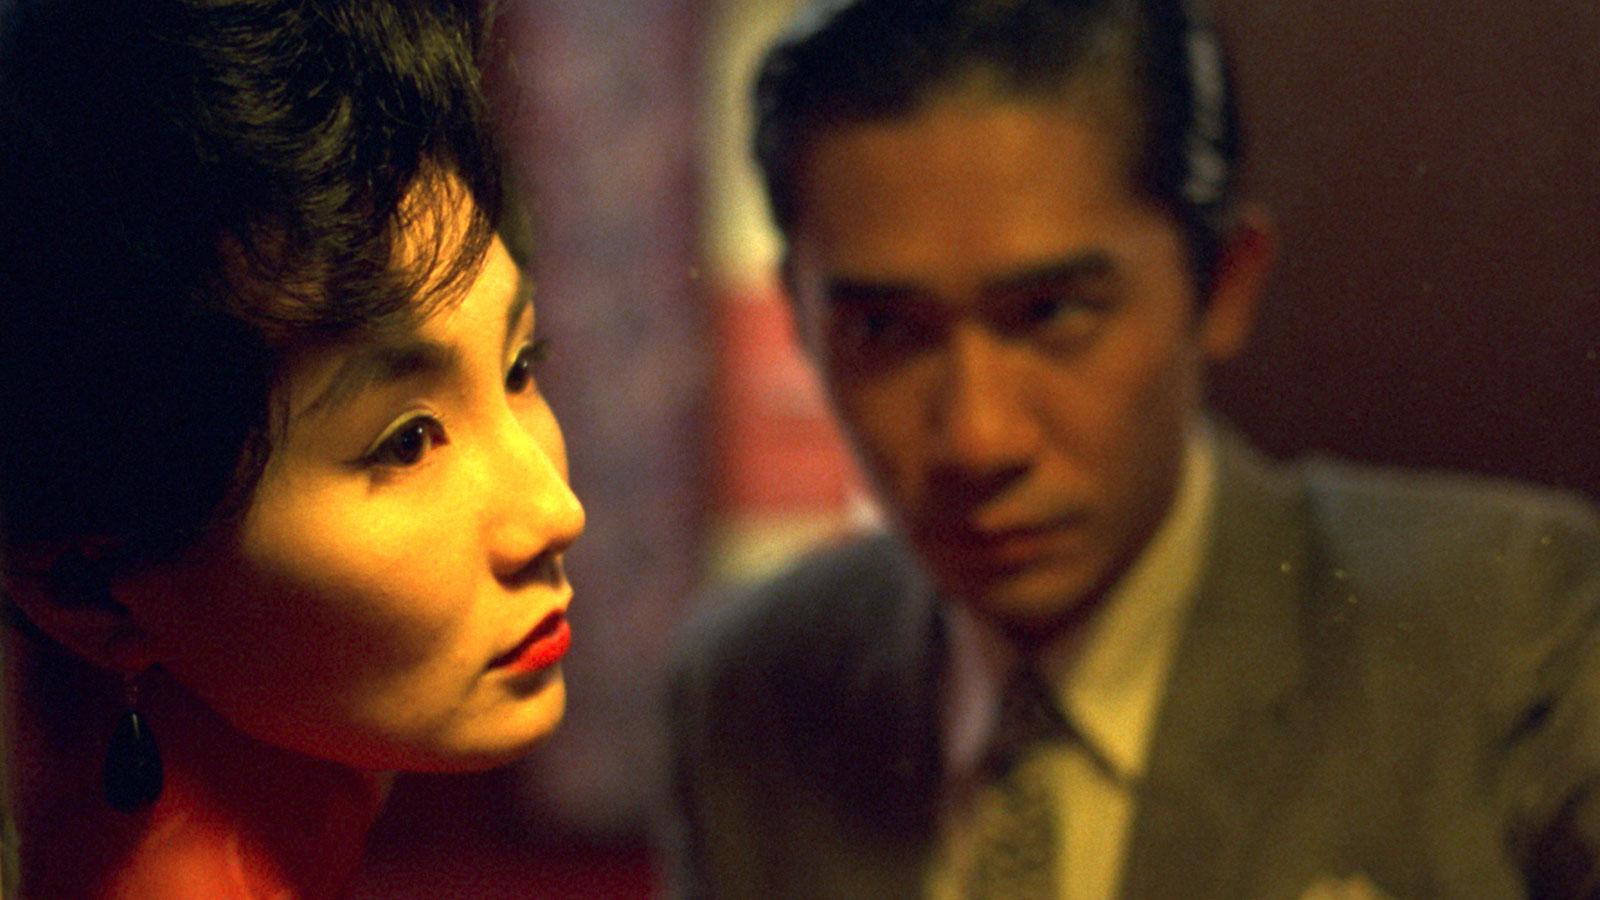 Scene from the film In the Mood for Love